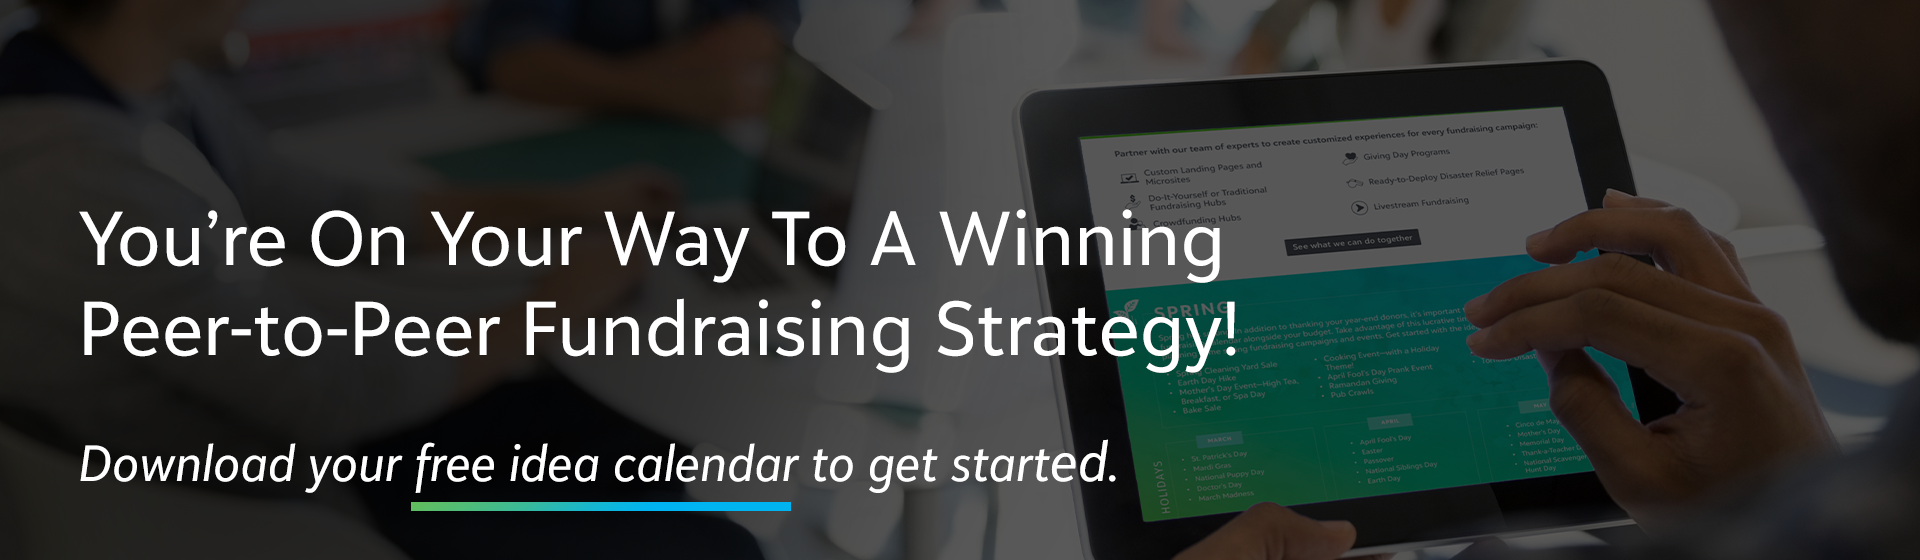 You're On Your Way To A Winning Peer-to-Peer Fundraising Strategy! Download your free idea calendar to get started.